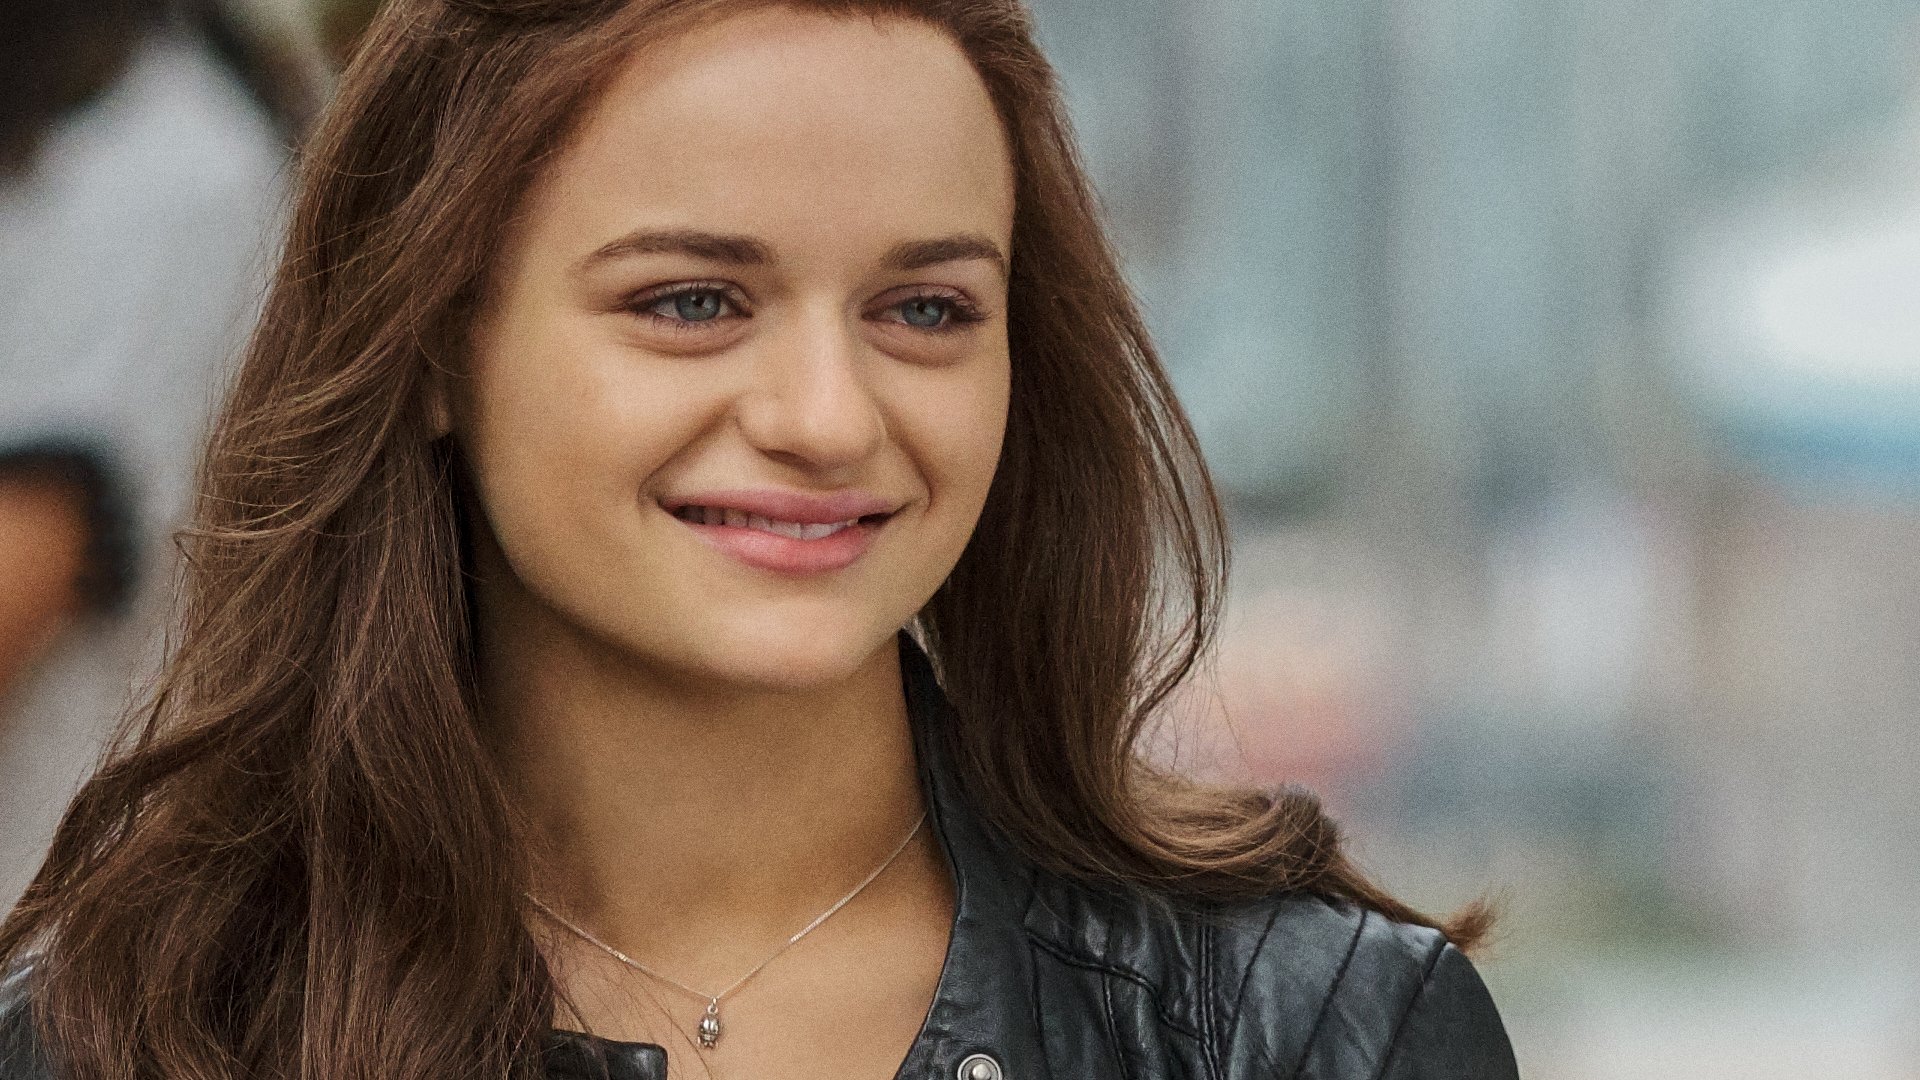 Joey King as Elle on 'The Kissing Booth 2' smiling